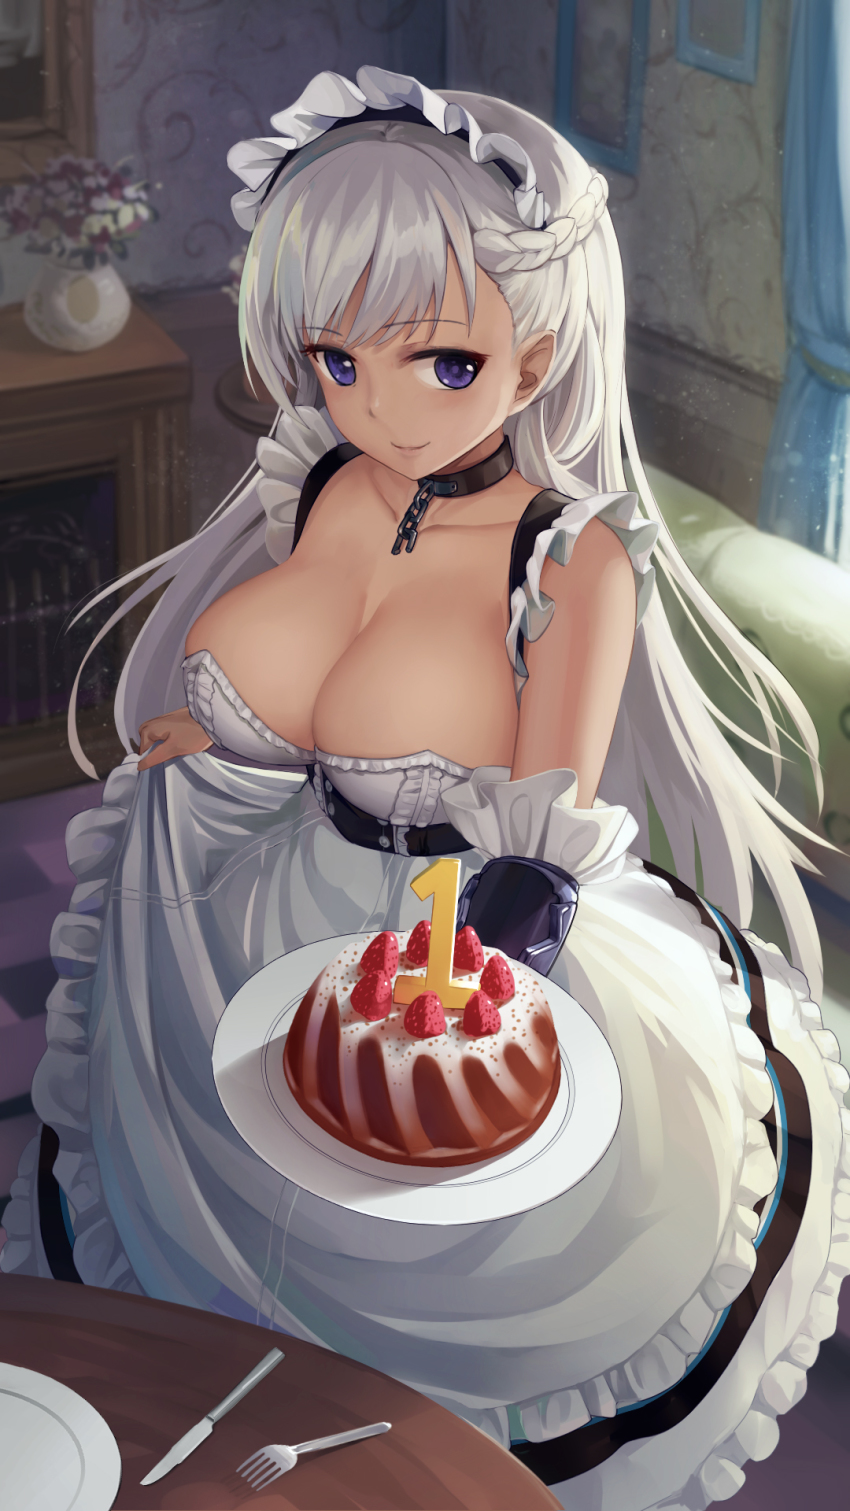 Anime Huge Boobs White - Big Tits Anime Maid Nut-Busting Post â€“ 19 pics - Hentaireviews